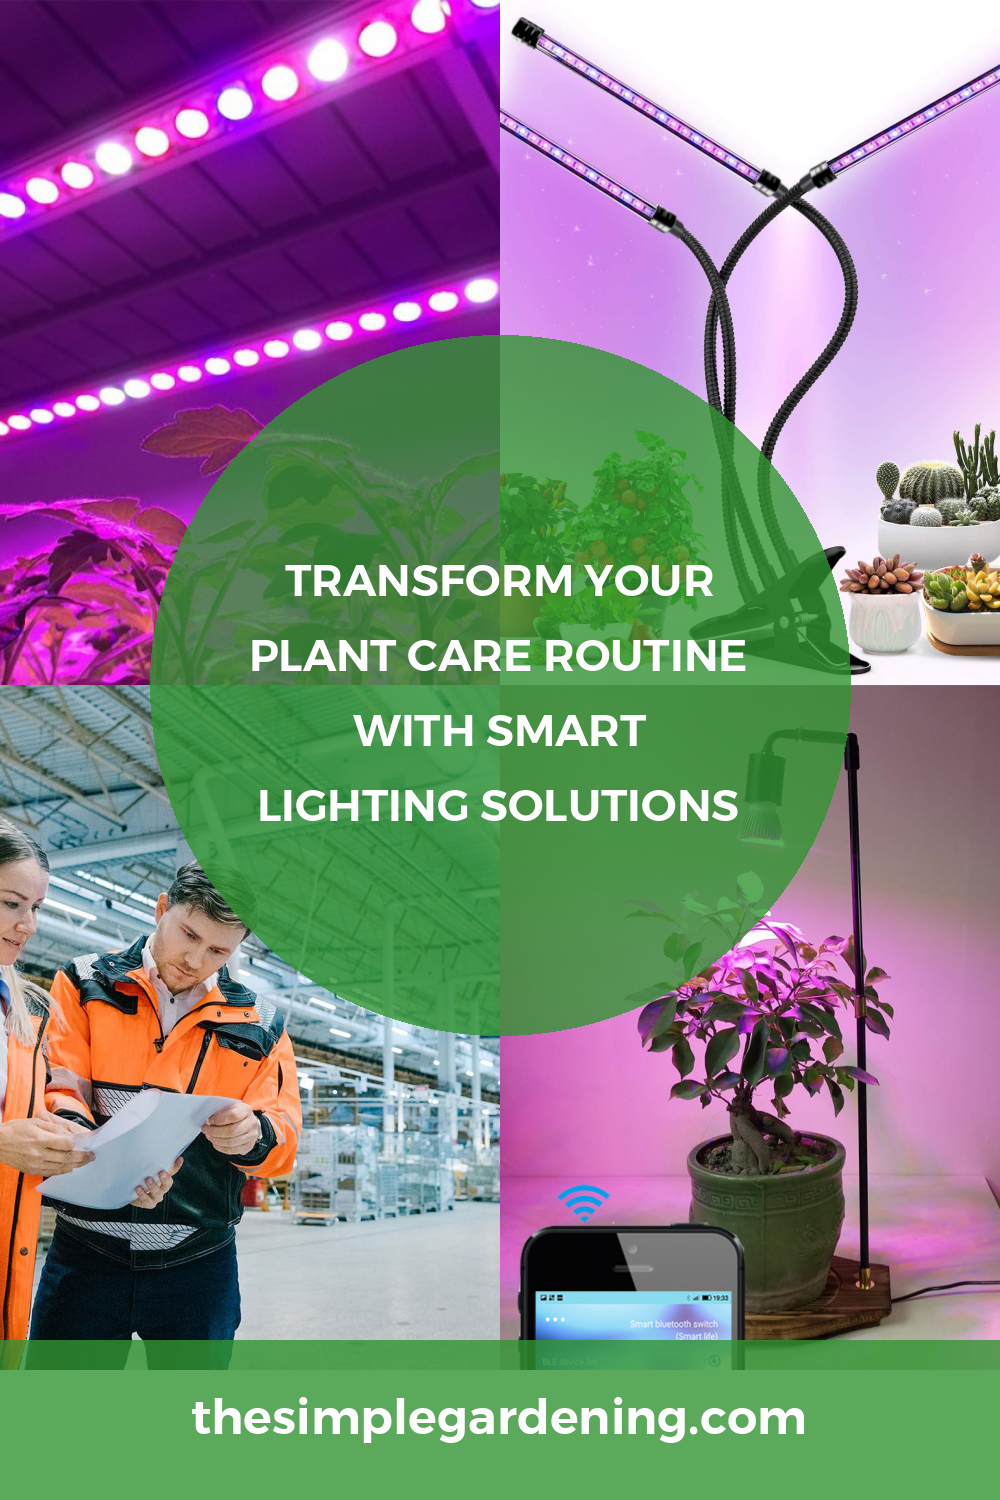 Transform Your Plant Care Routine with Smart Lighting Solutions